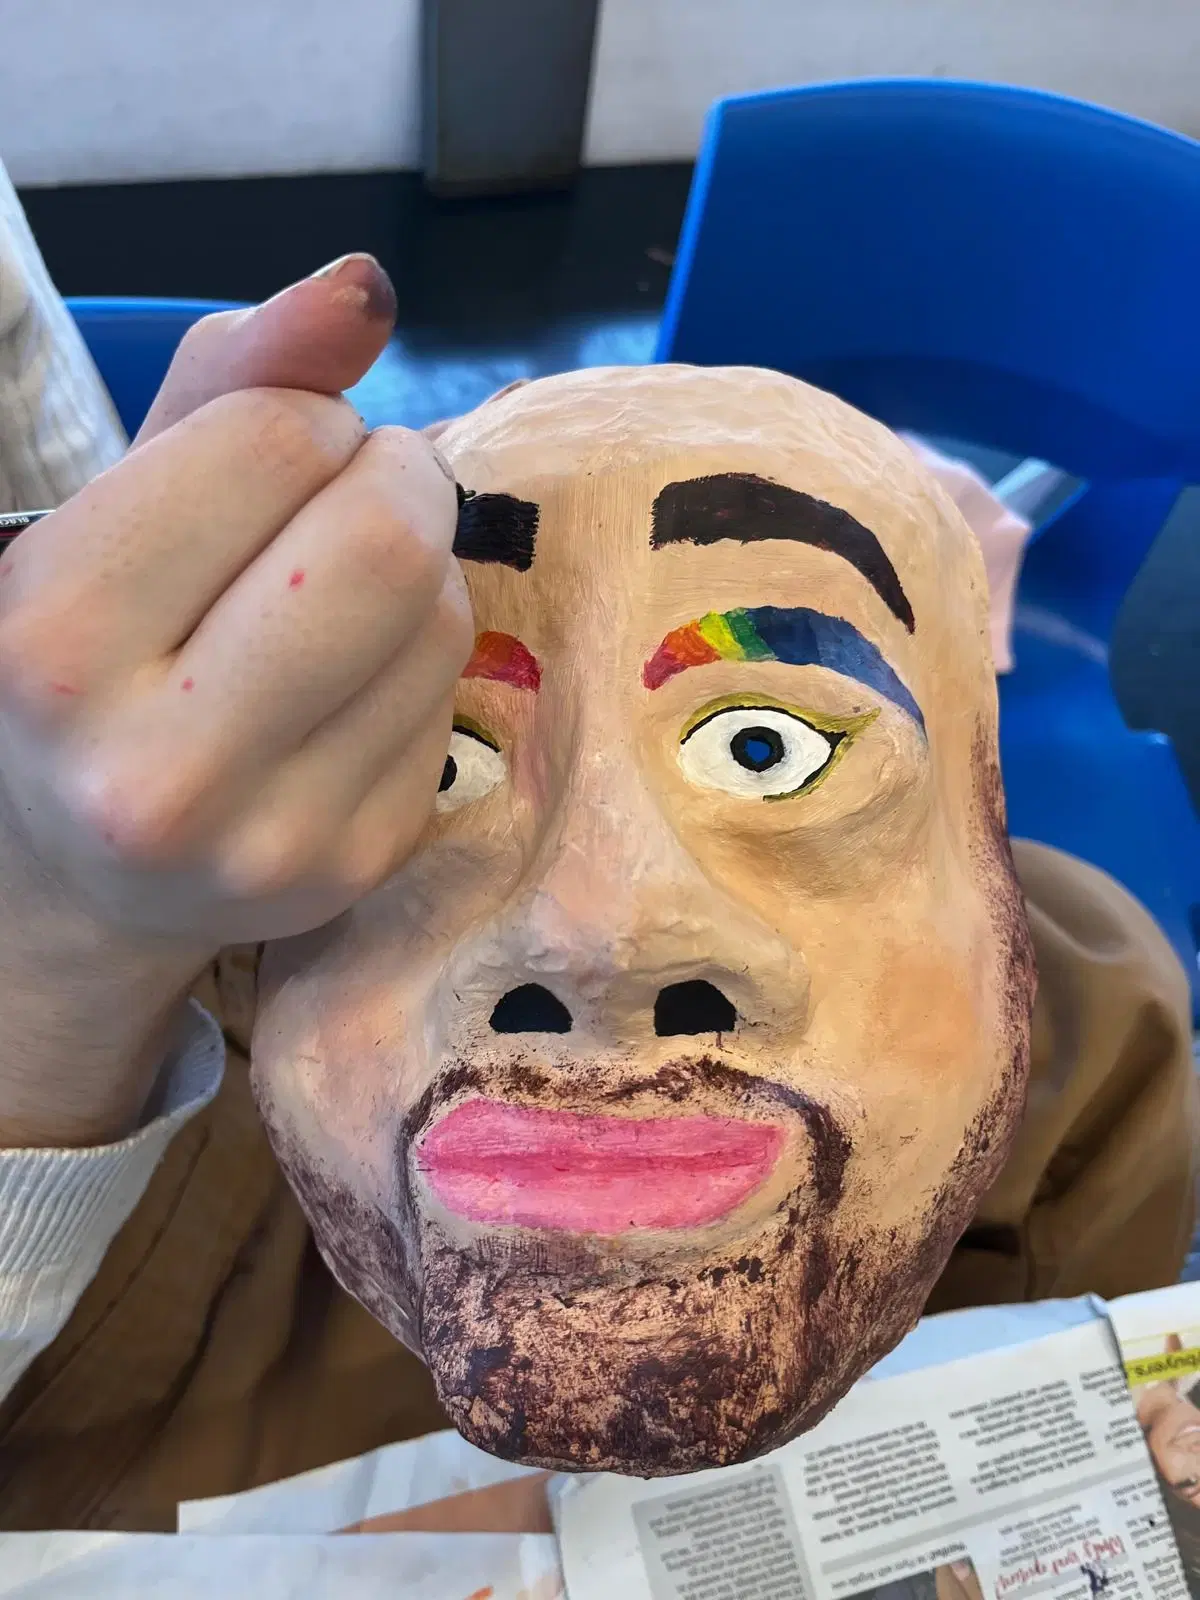 Beige mask with rainbow eyebrows and beard being painted by artist